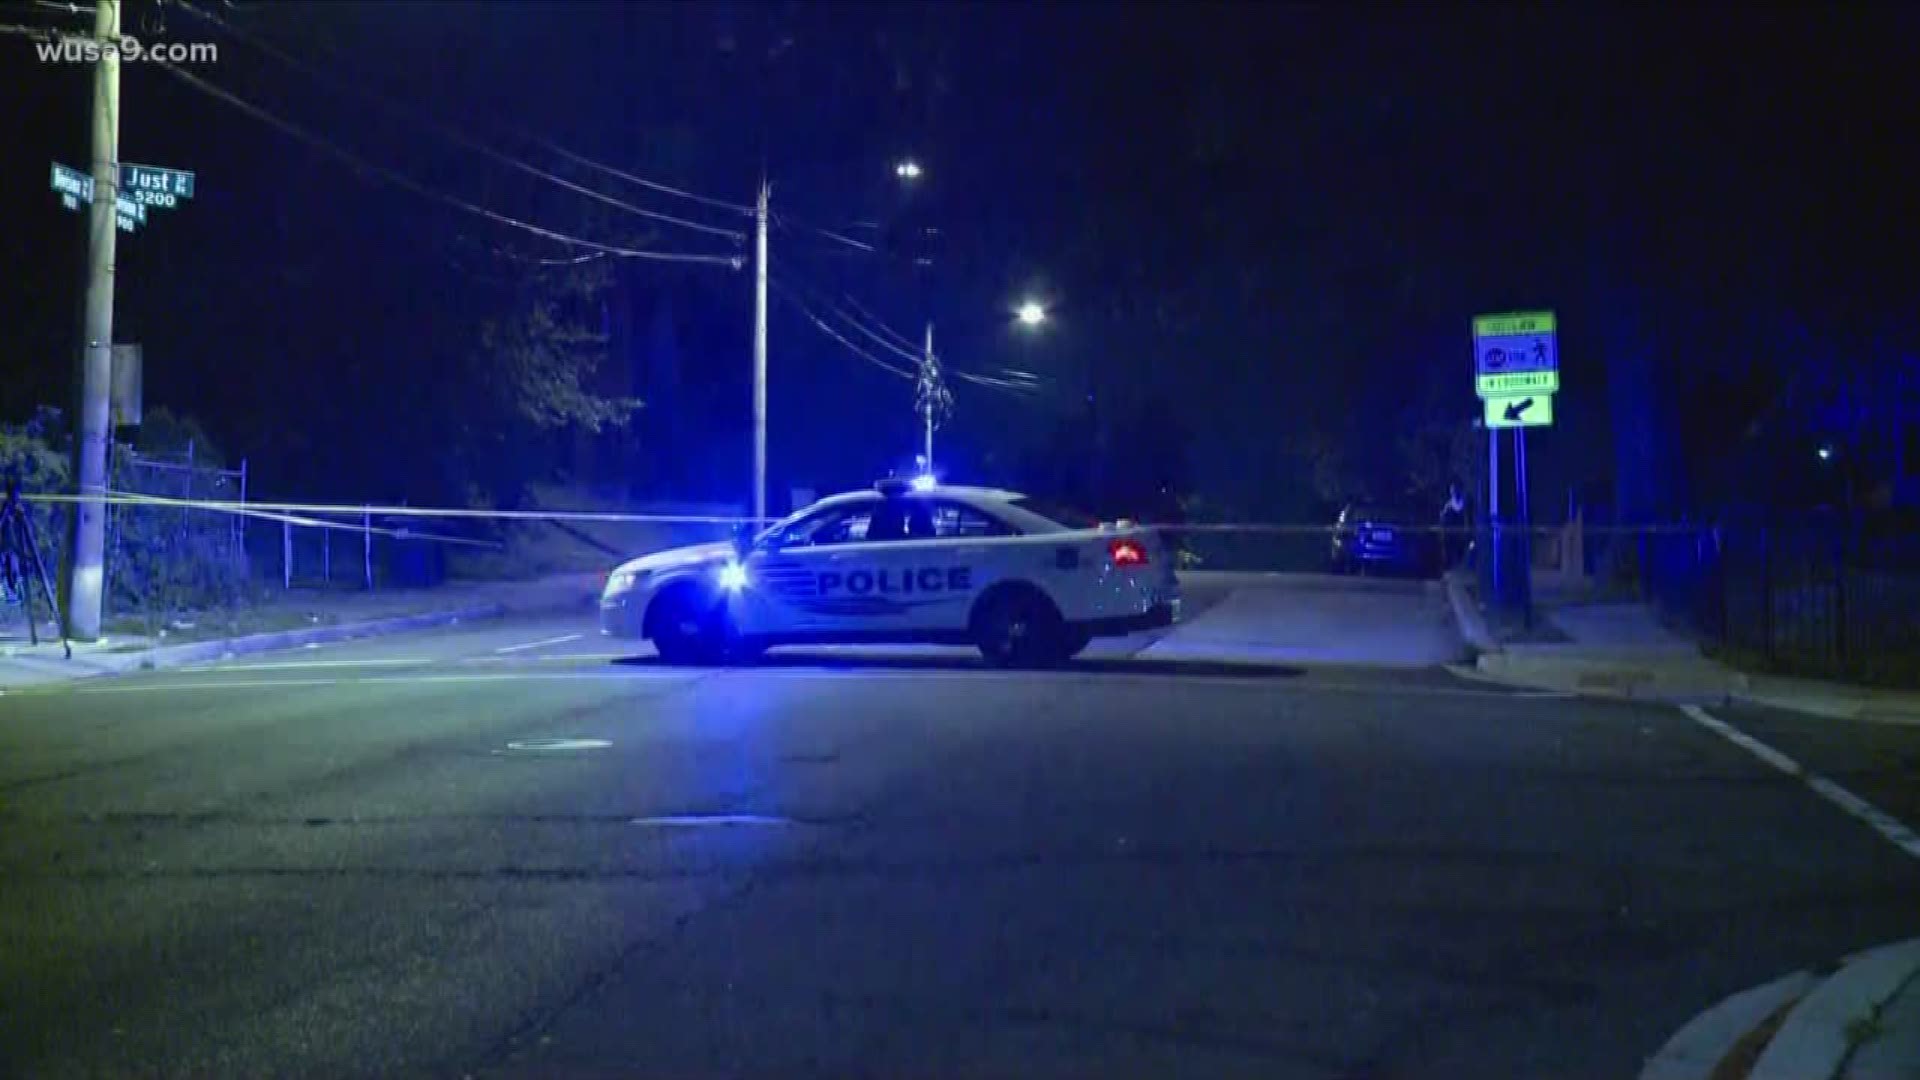 One man is dead and another one is injured after they were shot in Northeast D.C. late Tuesday night, officials said.